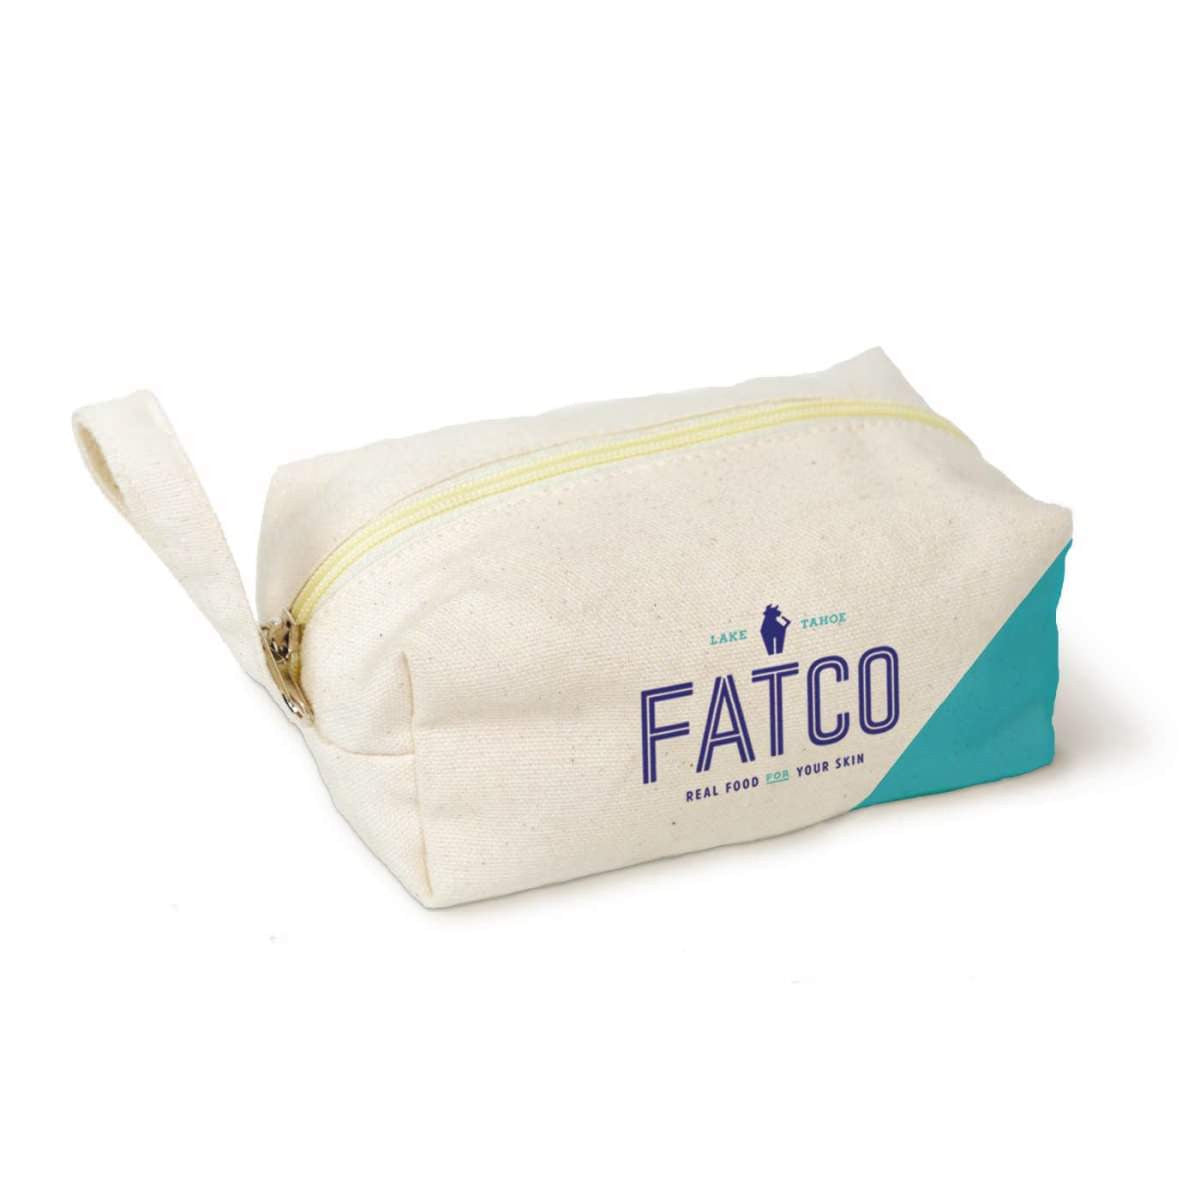 Facial Skincare Set For Normal Skin, Pregnancy Safe by FATCO Skincare Products